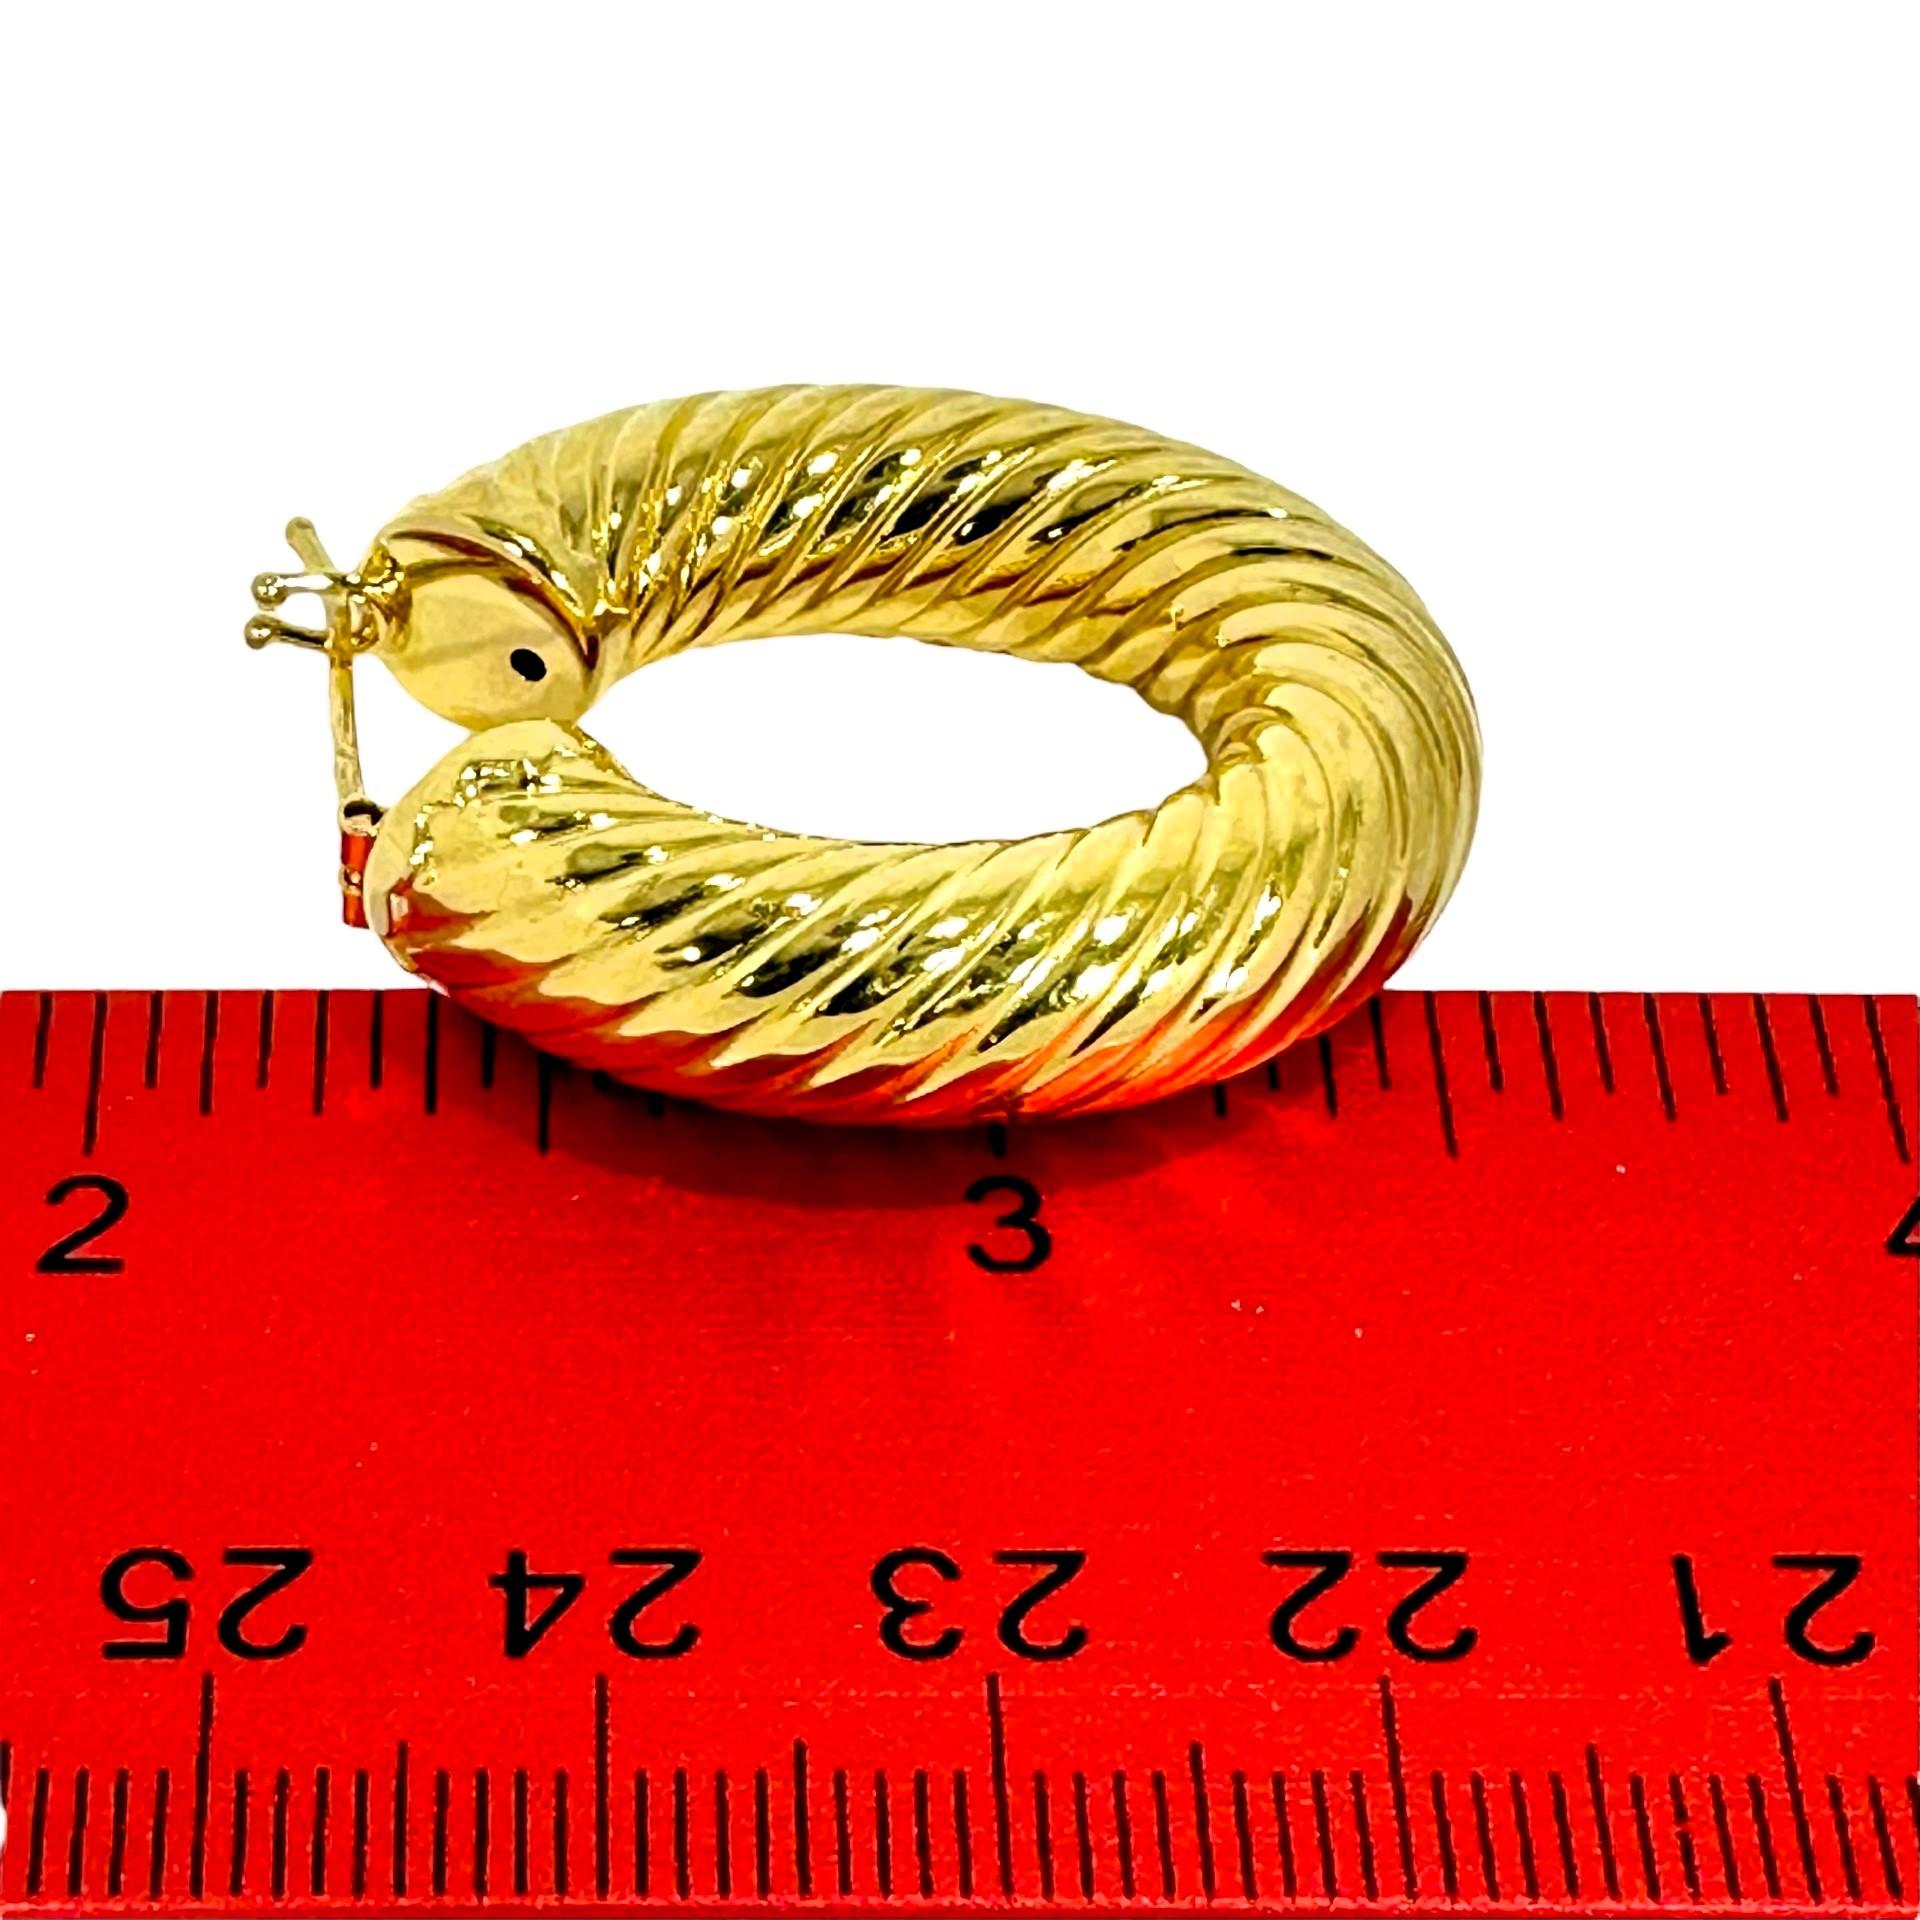 Italian 18K Yellow Gold Twisted Hoop Earrings 1.25 Inches Long x 1/4 Inch Thick For Sale 1